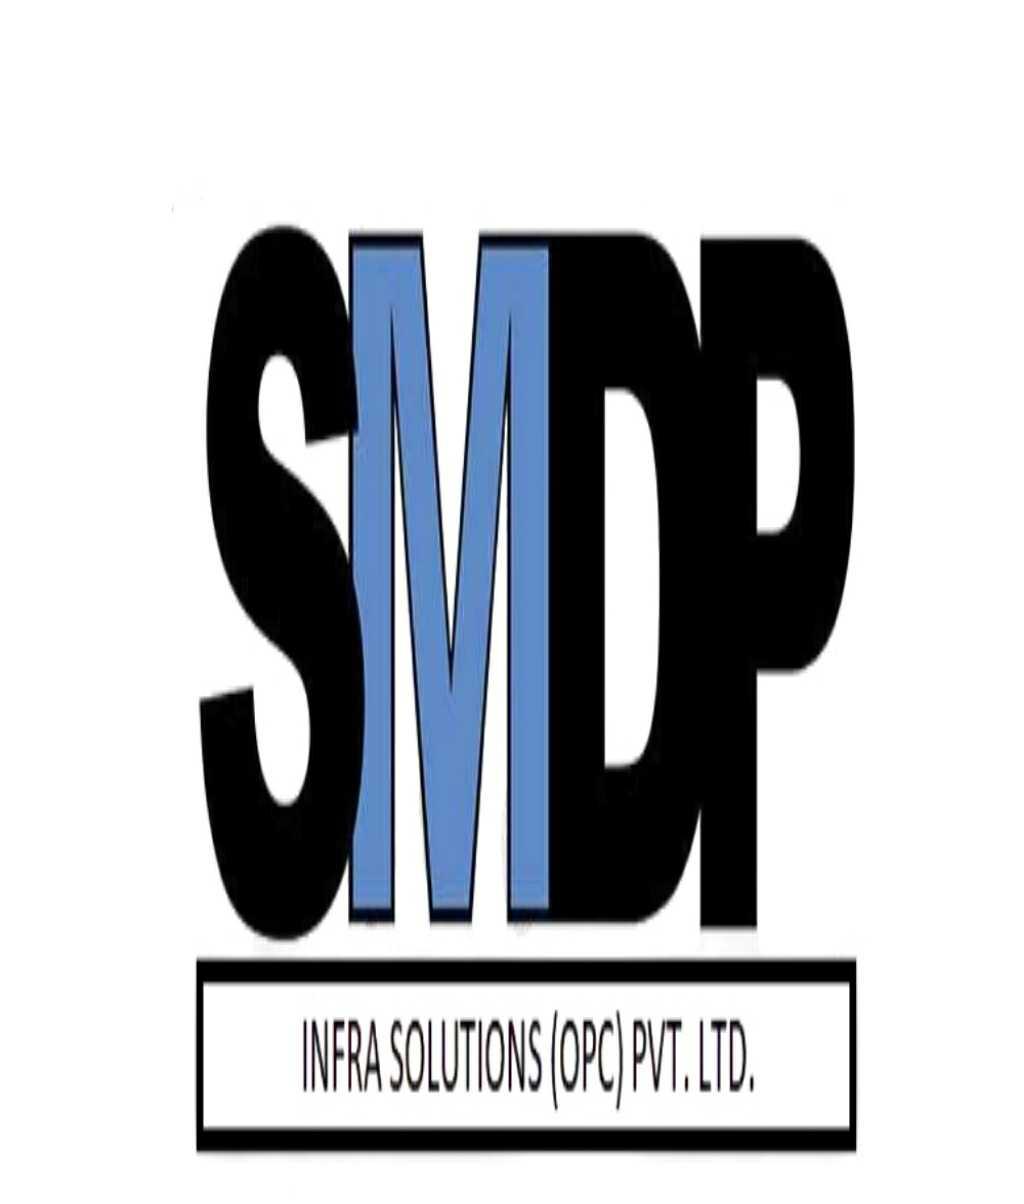 SMDP INFRASOLUTIONS (OPC) PRIVATE LIMITED